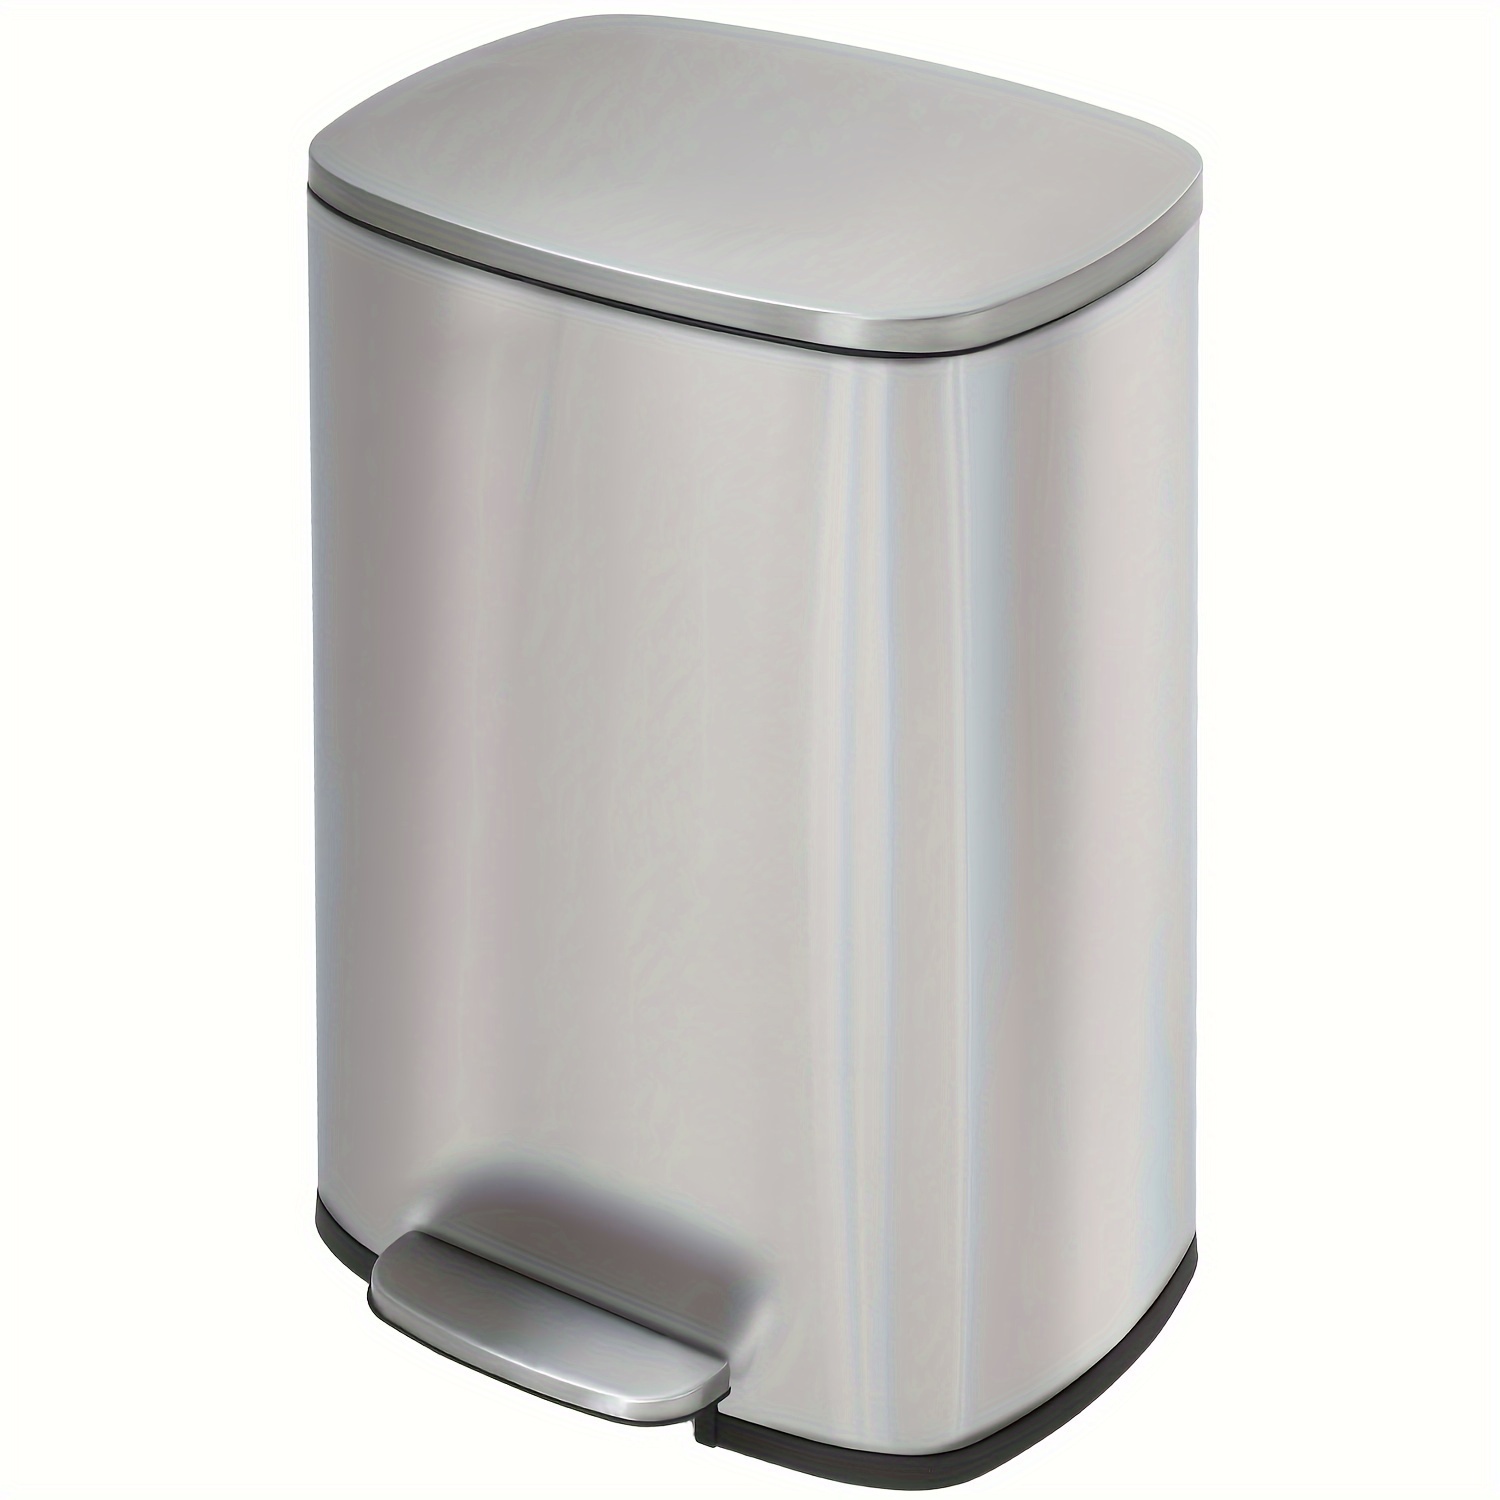 

Trash Can 13 Gallon/ 50 Liter Kitchen Garbage Can Fingerprint Proof Stainless Steel With Removable Inner Bucket And Hinged Lids, Pedal Rubbish Bin For Home Office